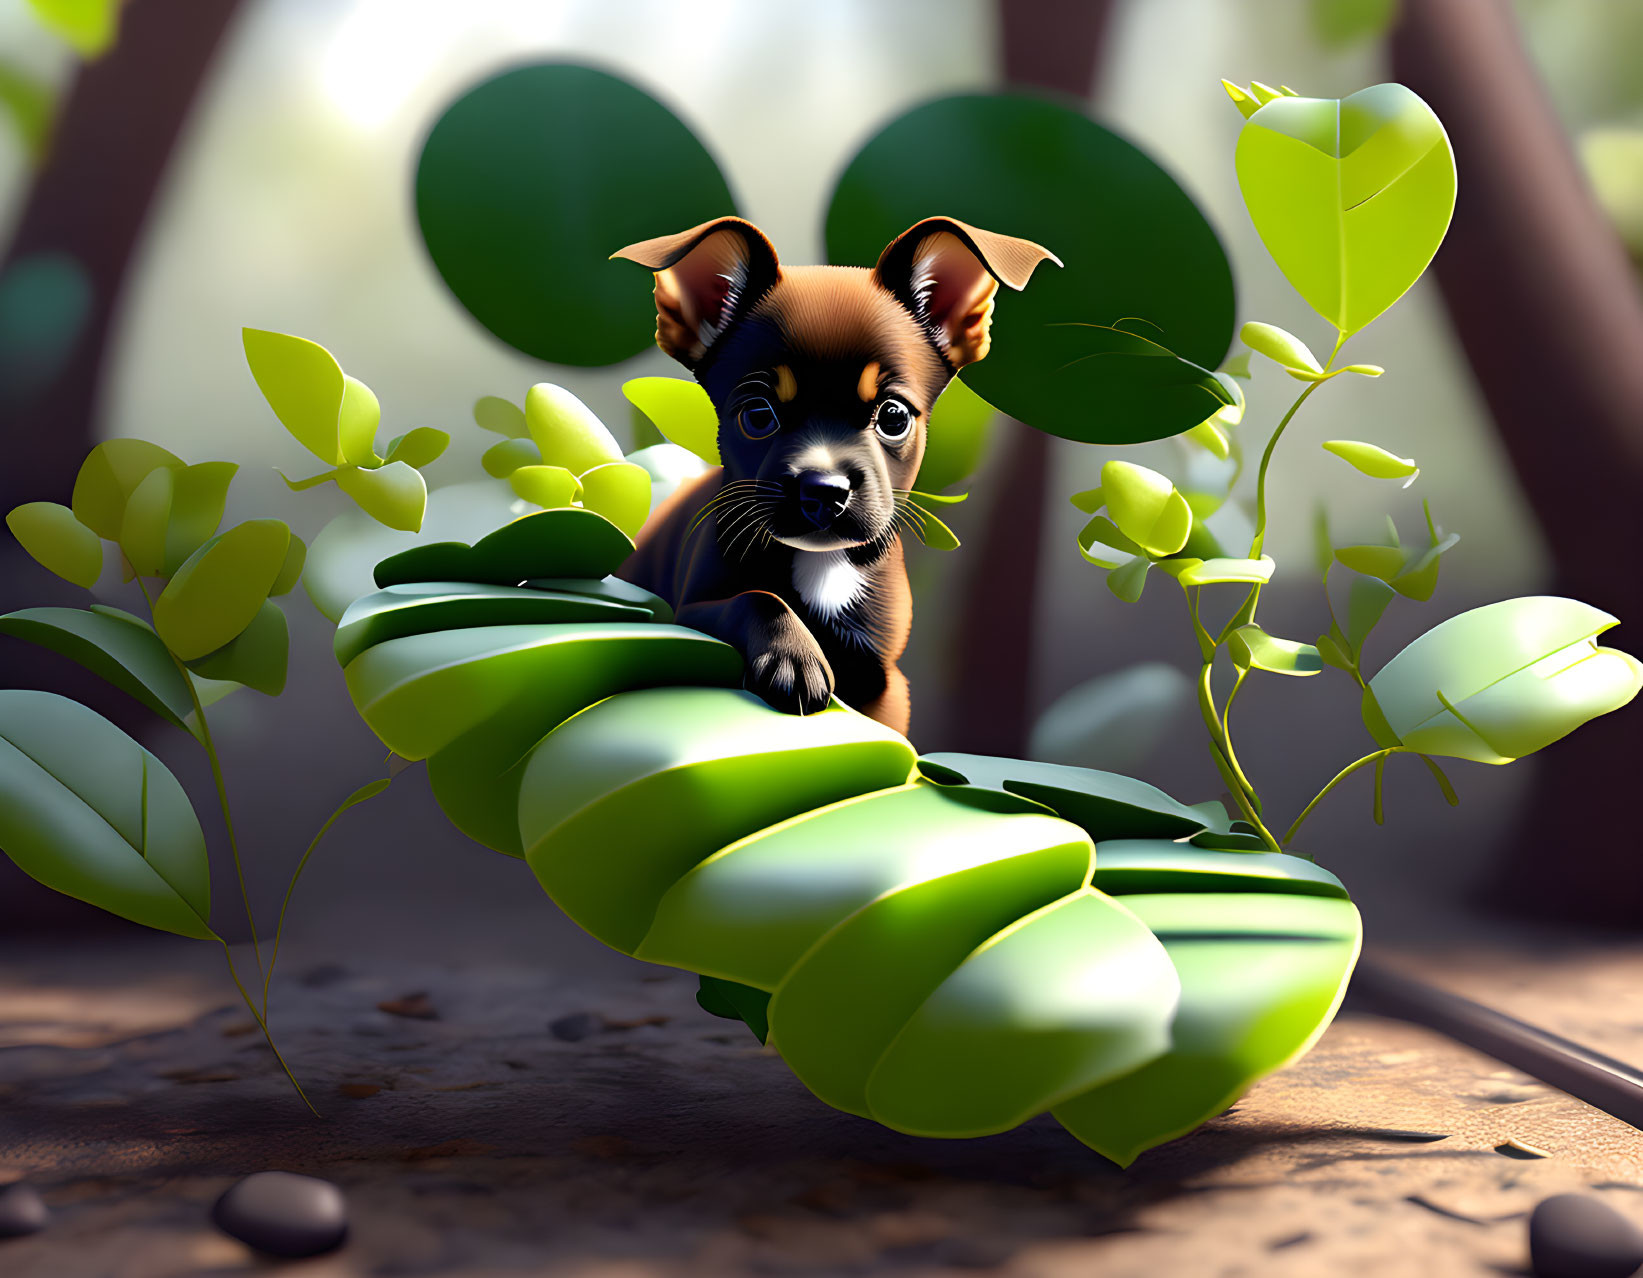 Animated puppy on green leaf in forest: Curious large-eared pup.